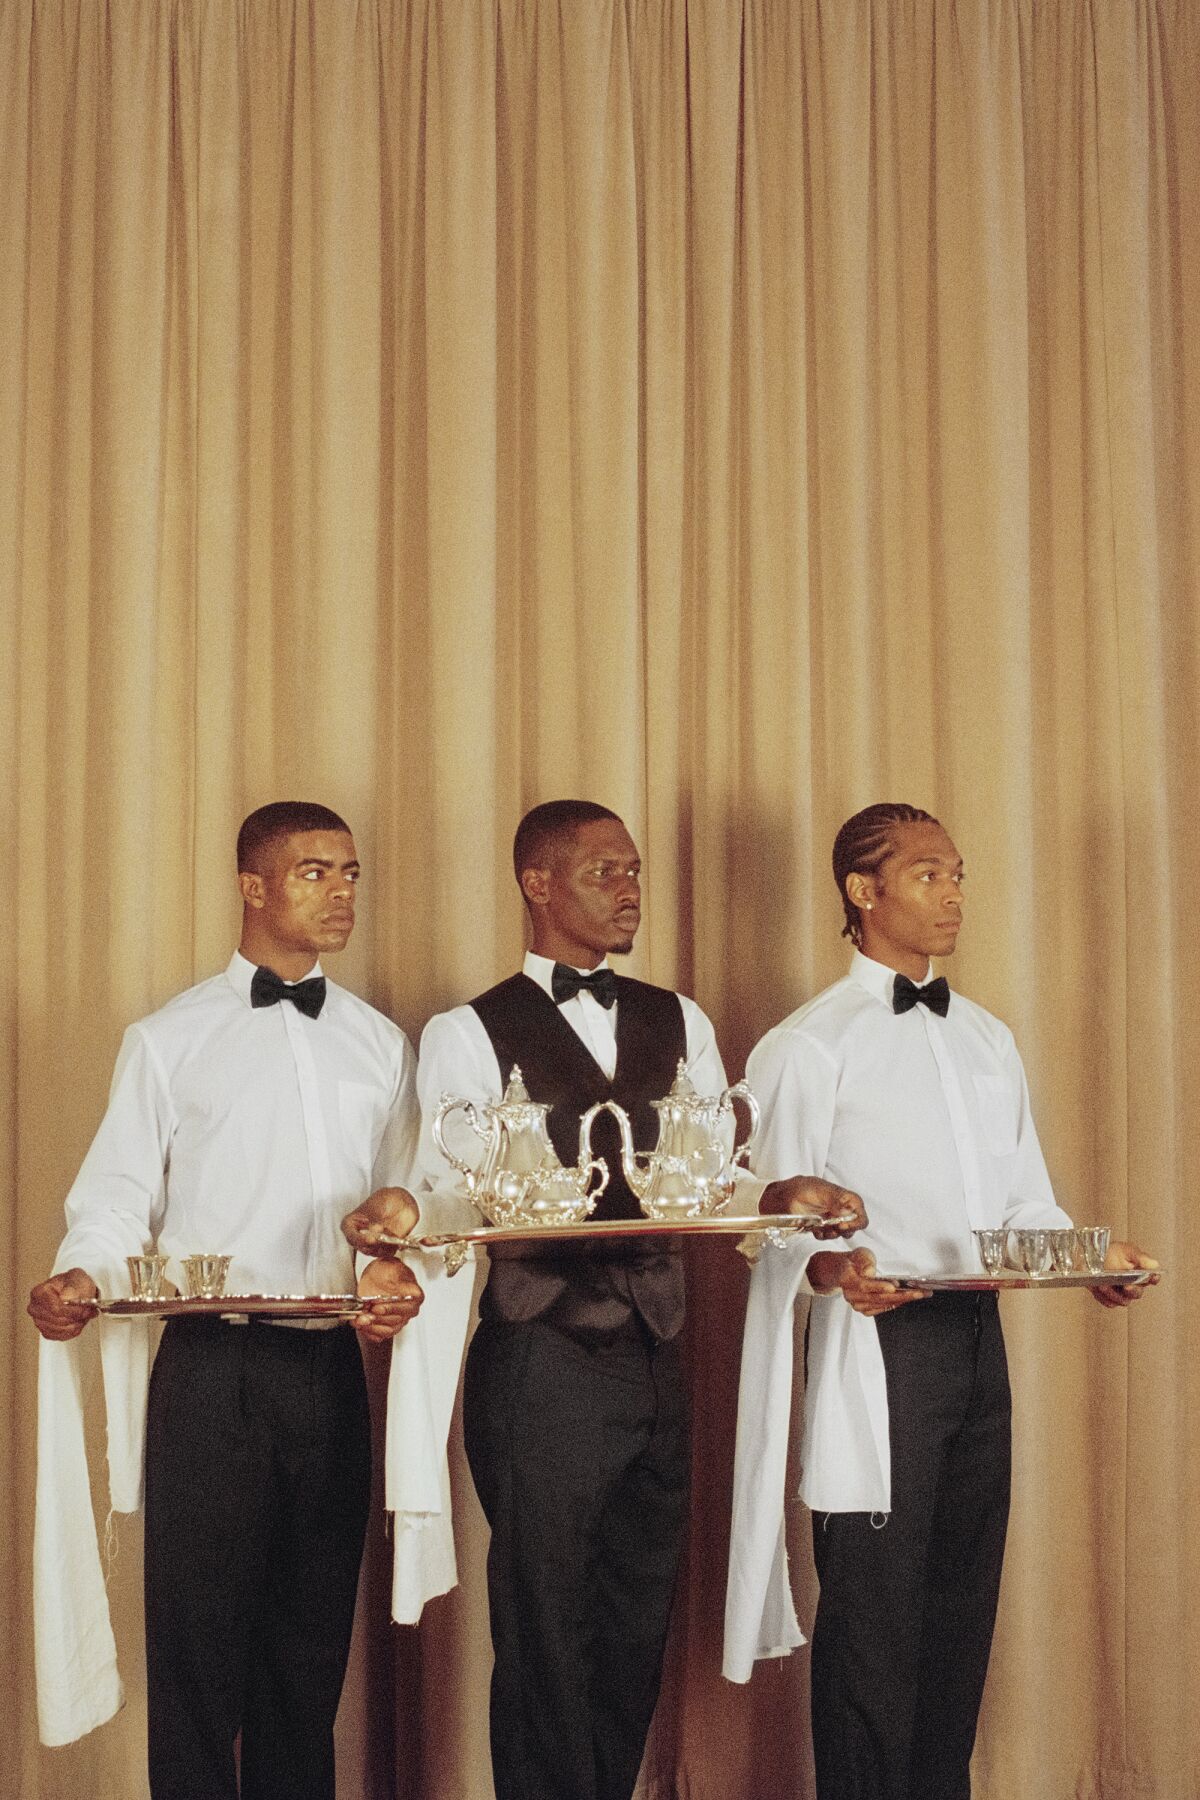 An image of three men holding trays in front of a beige curtain.